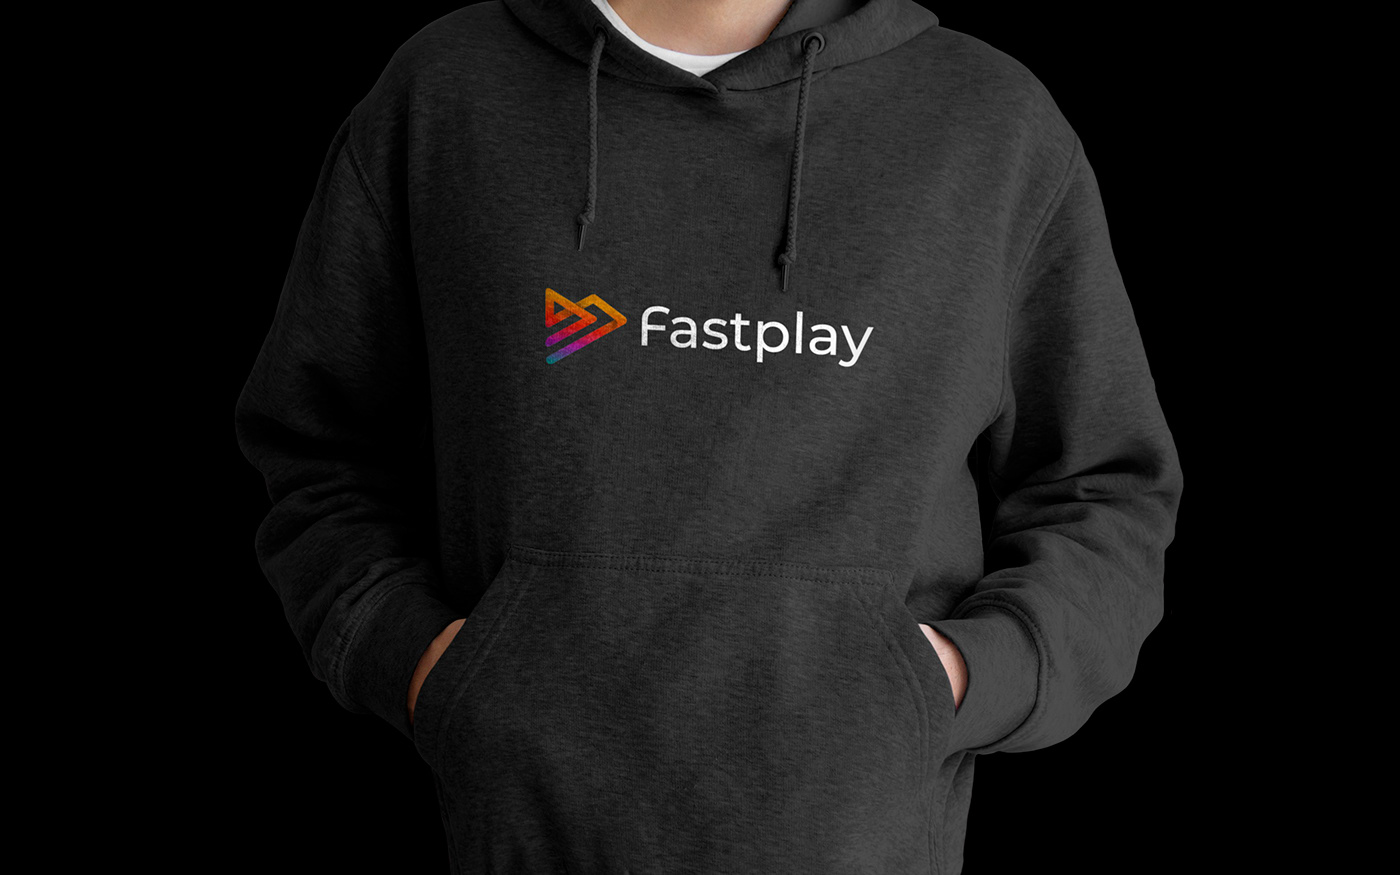 PLAY LOGO
PLAY LOGO MARK
PLAY
PLAYING
PLAY ICON
FASTPLAY LOGO
ICONIC LOGO
STARTUP
BUSINESS
MODERN
